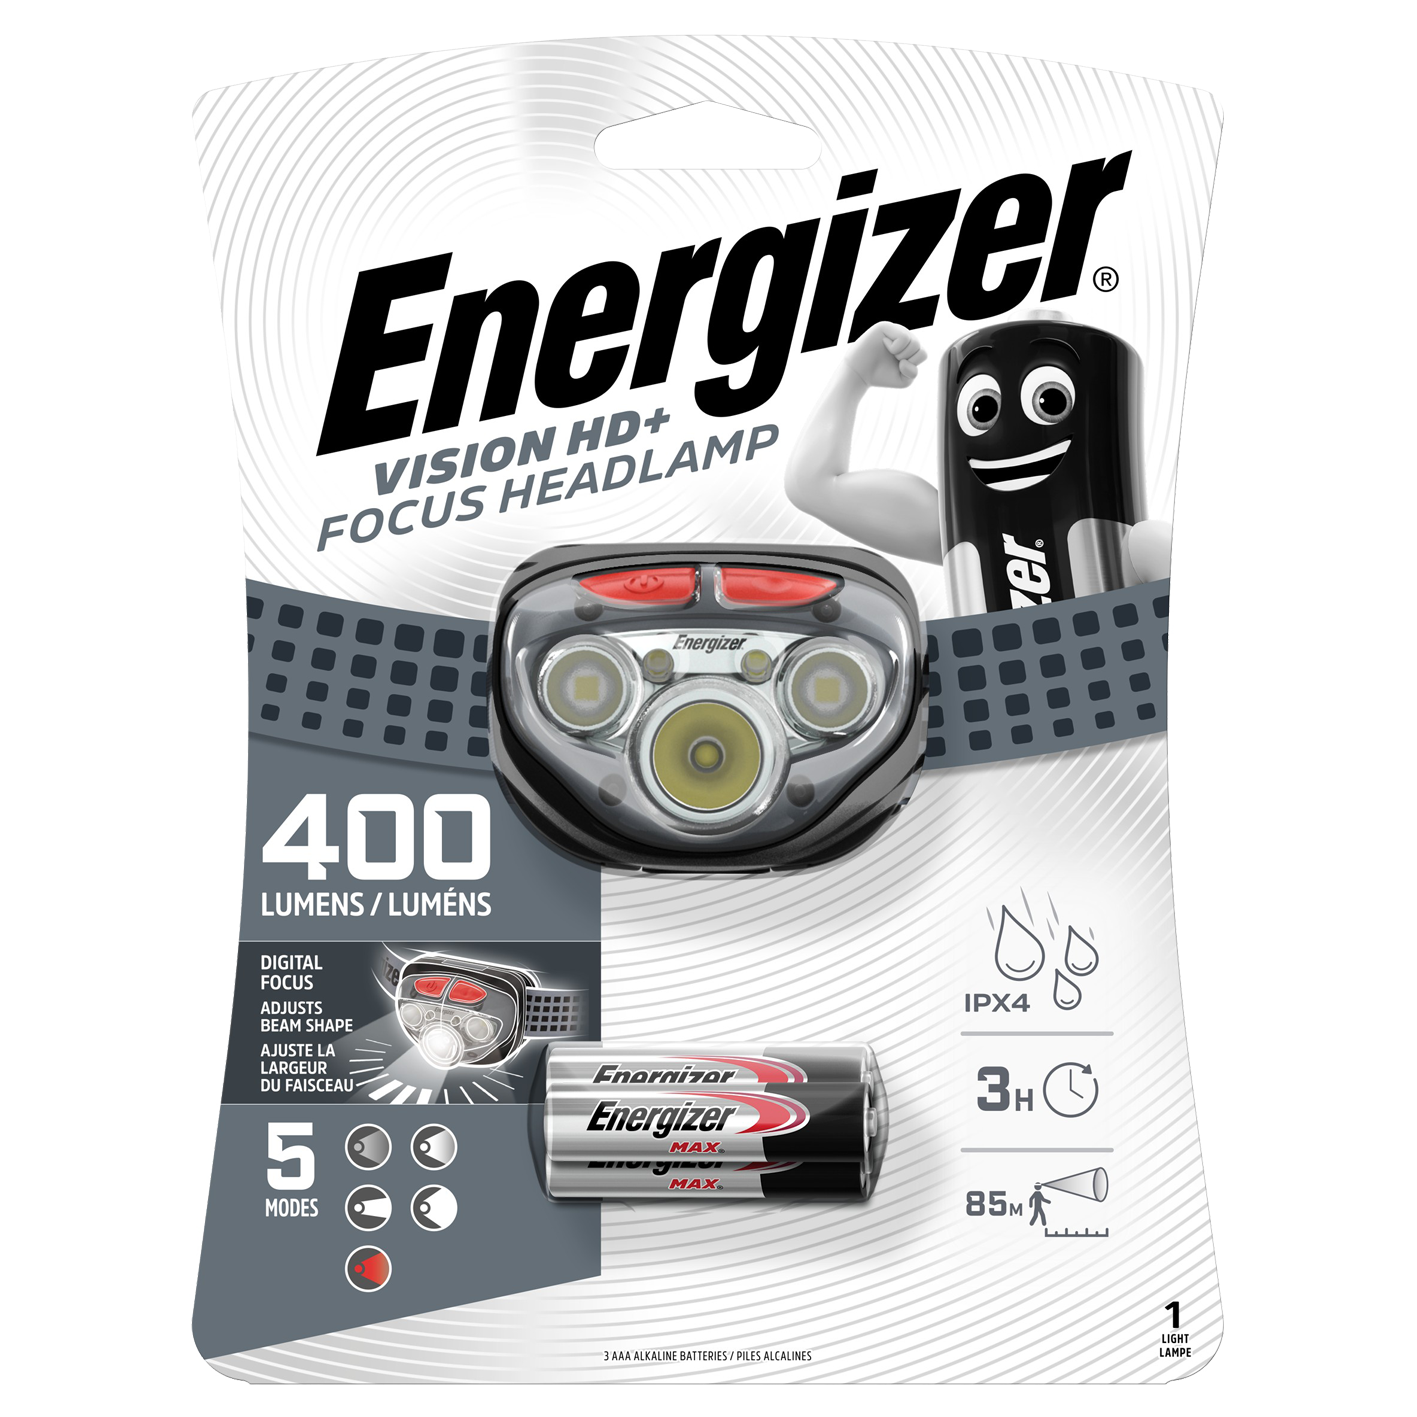 Energizer® Vision HD+ Focus 400 Lumens Headlight Torch With 3 x AAA Batteries